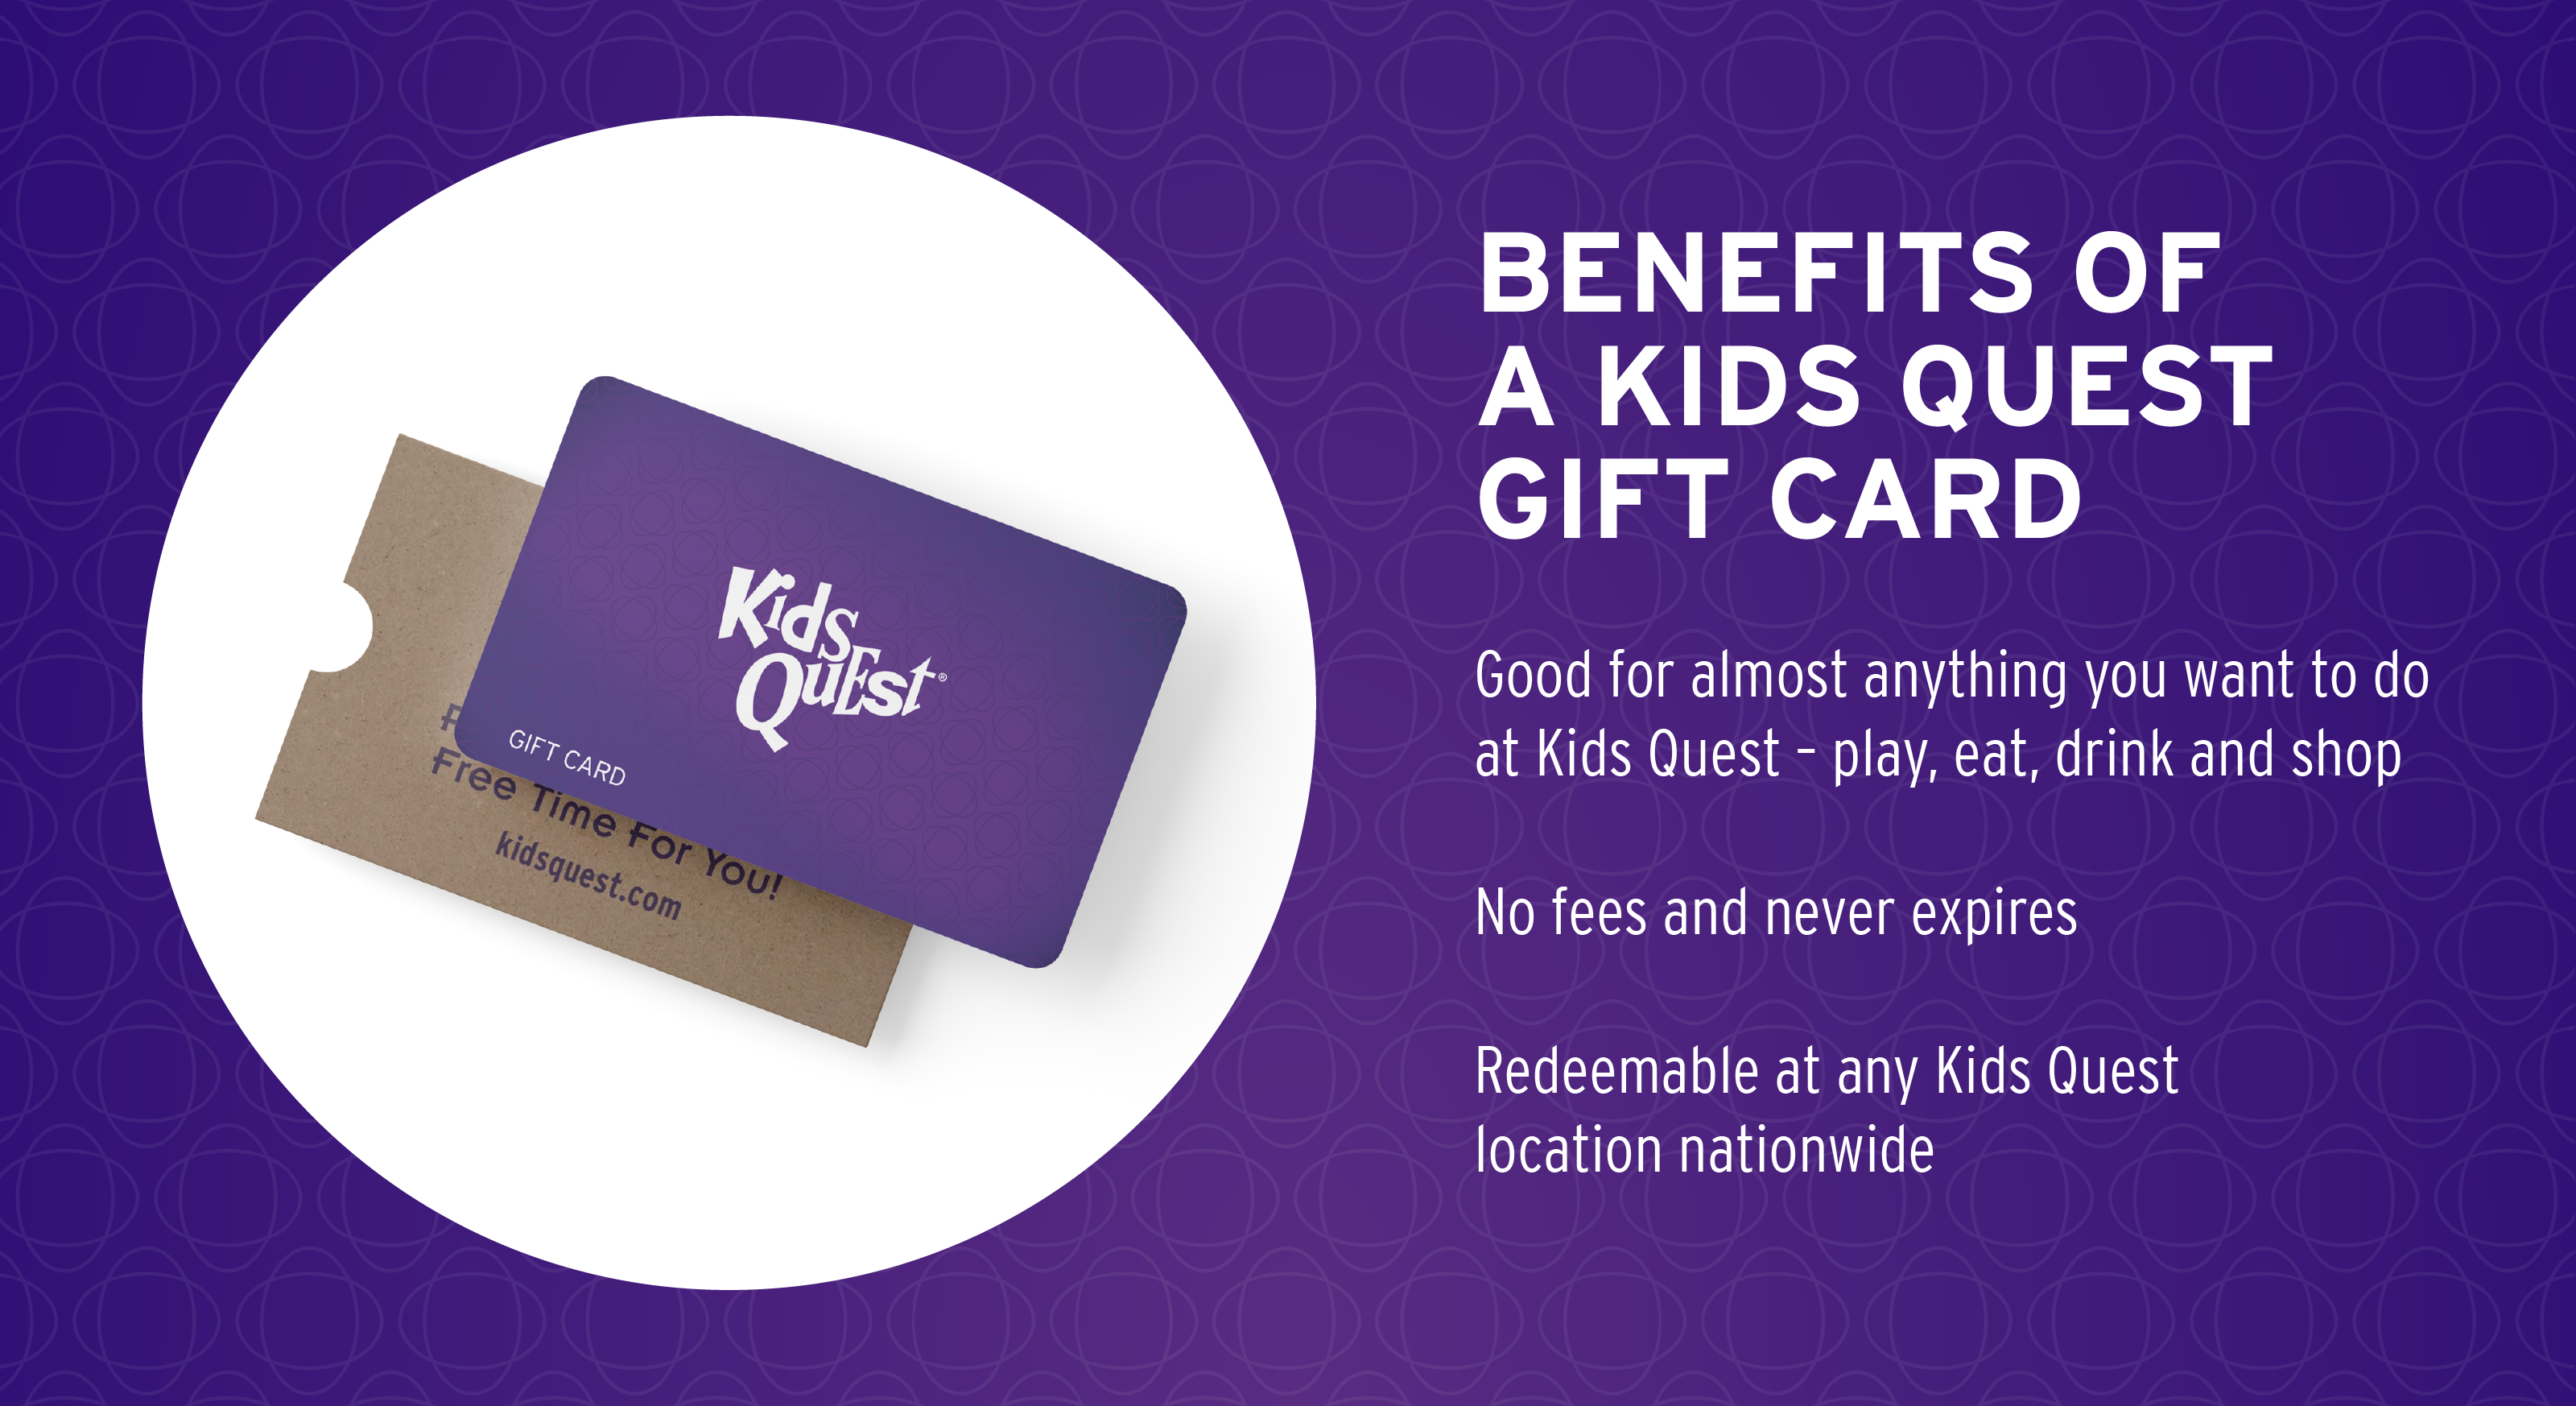 Benefits of a Kids Quest Gift Card